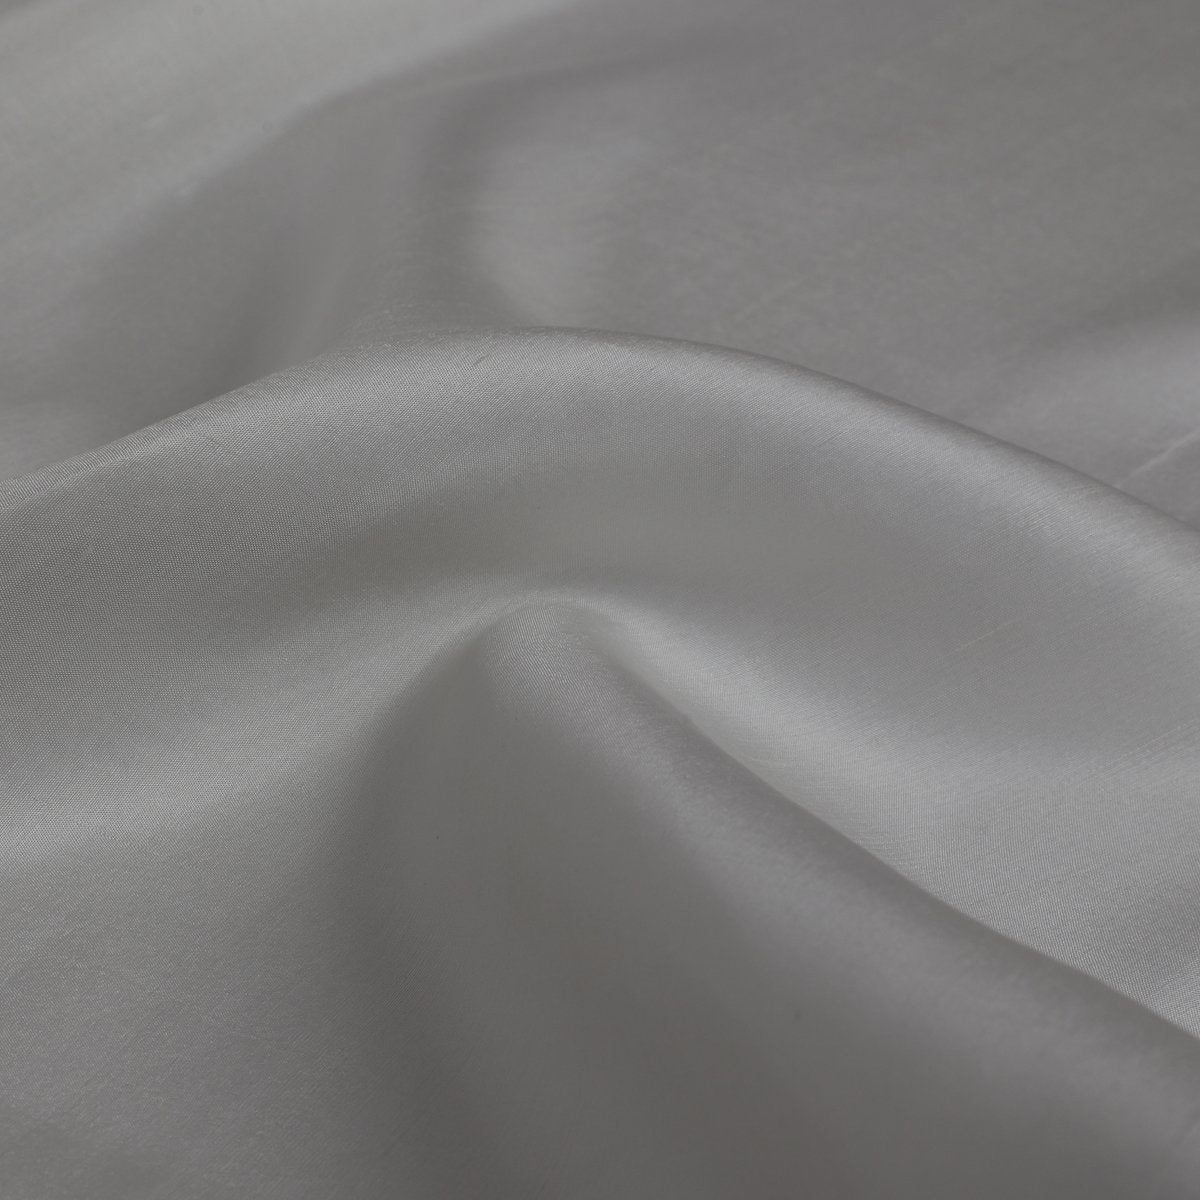 Off White Color 60 GLM Dupion Silk Dyeable Fabric